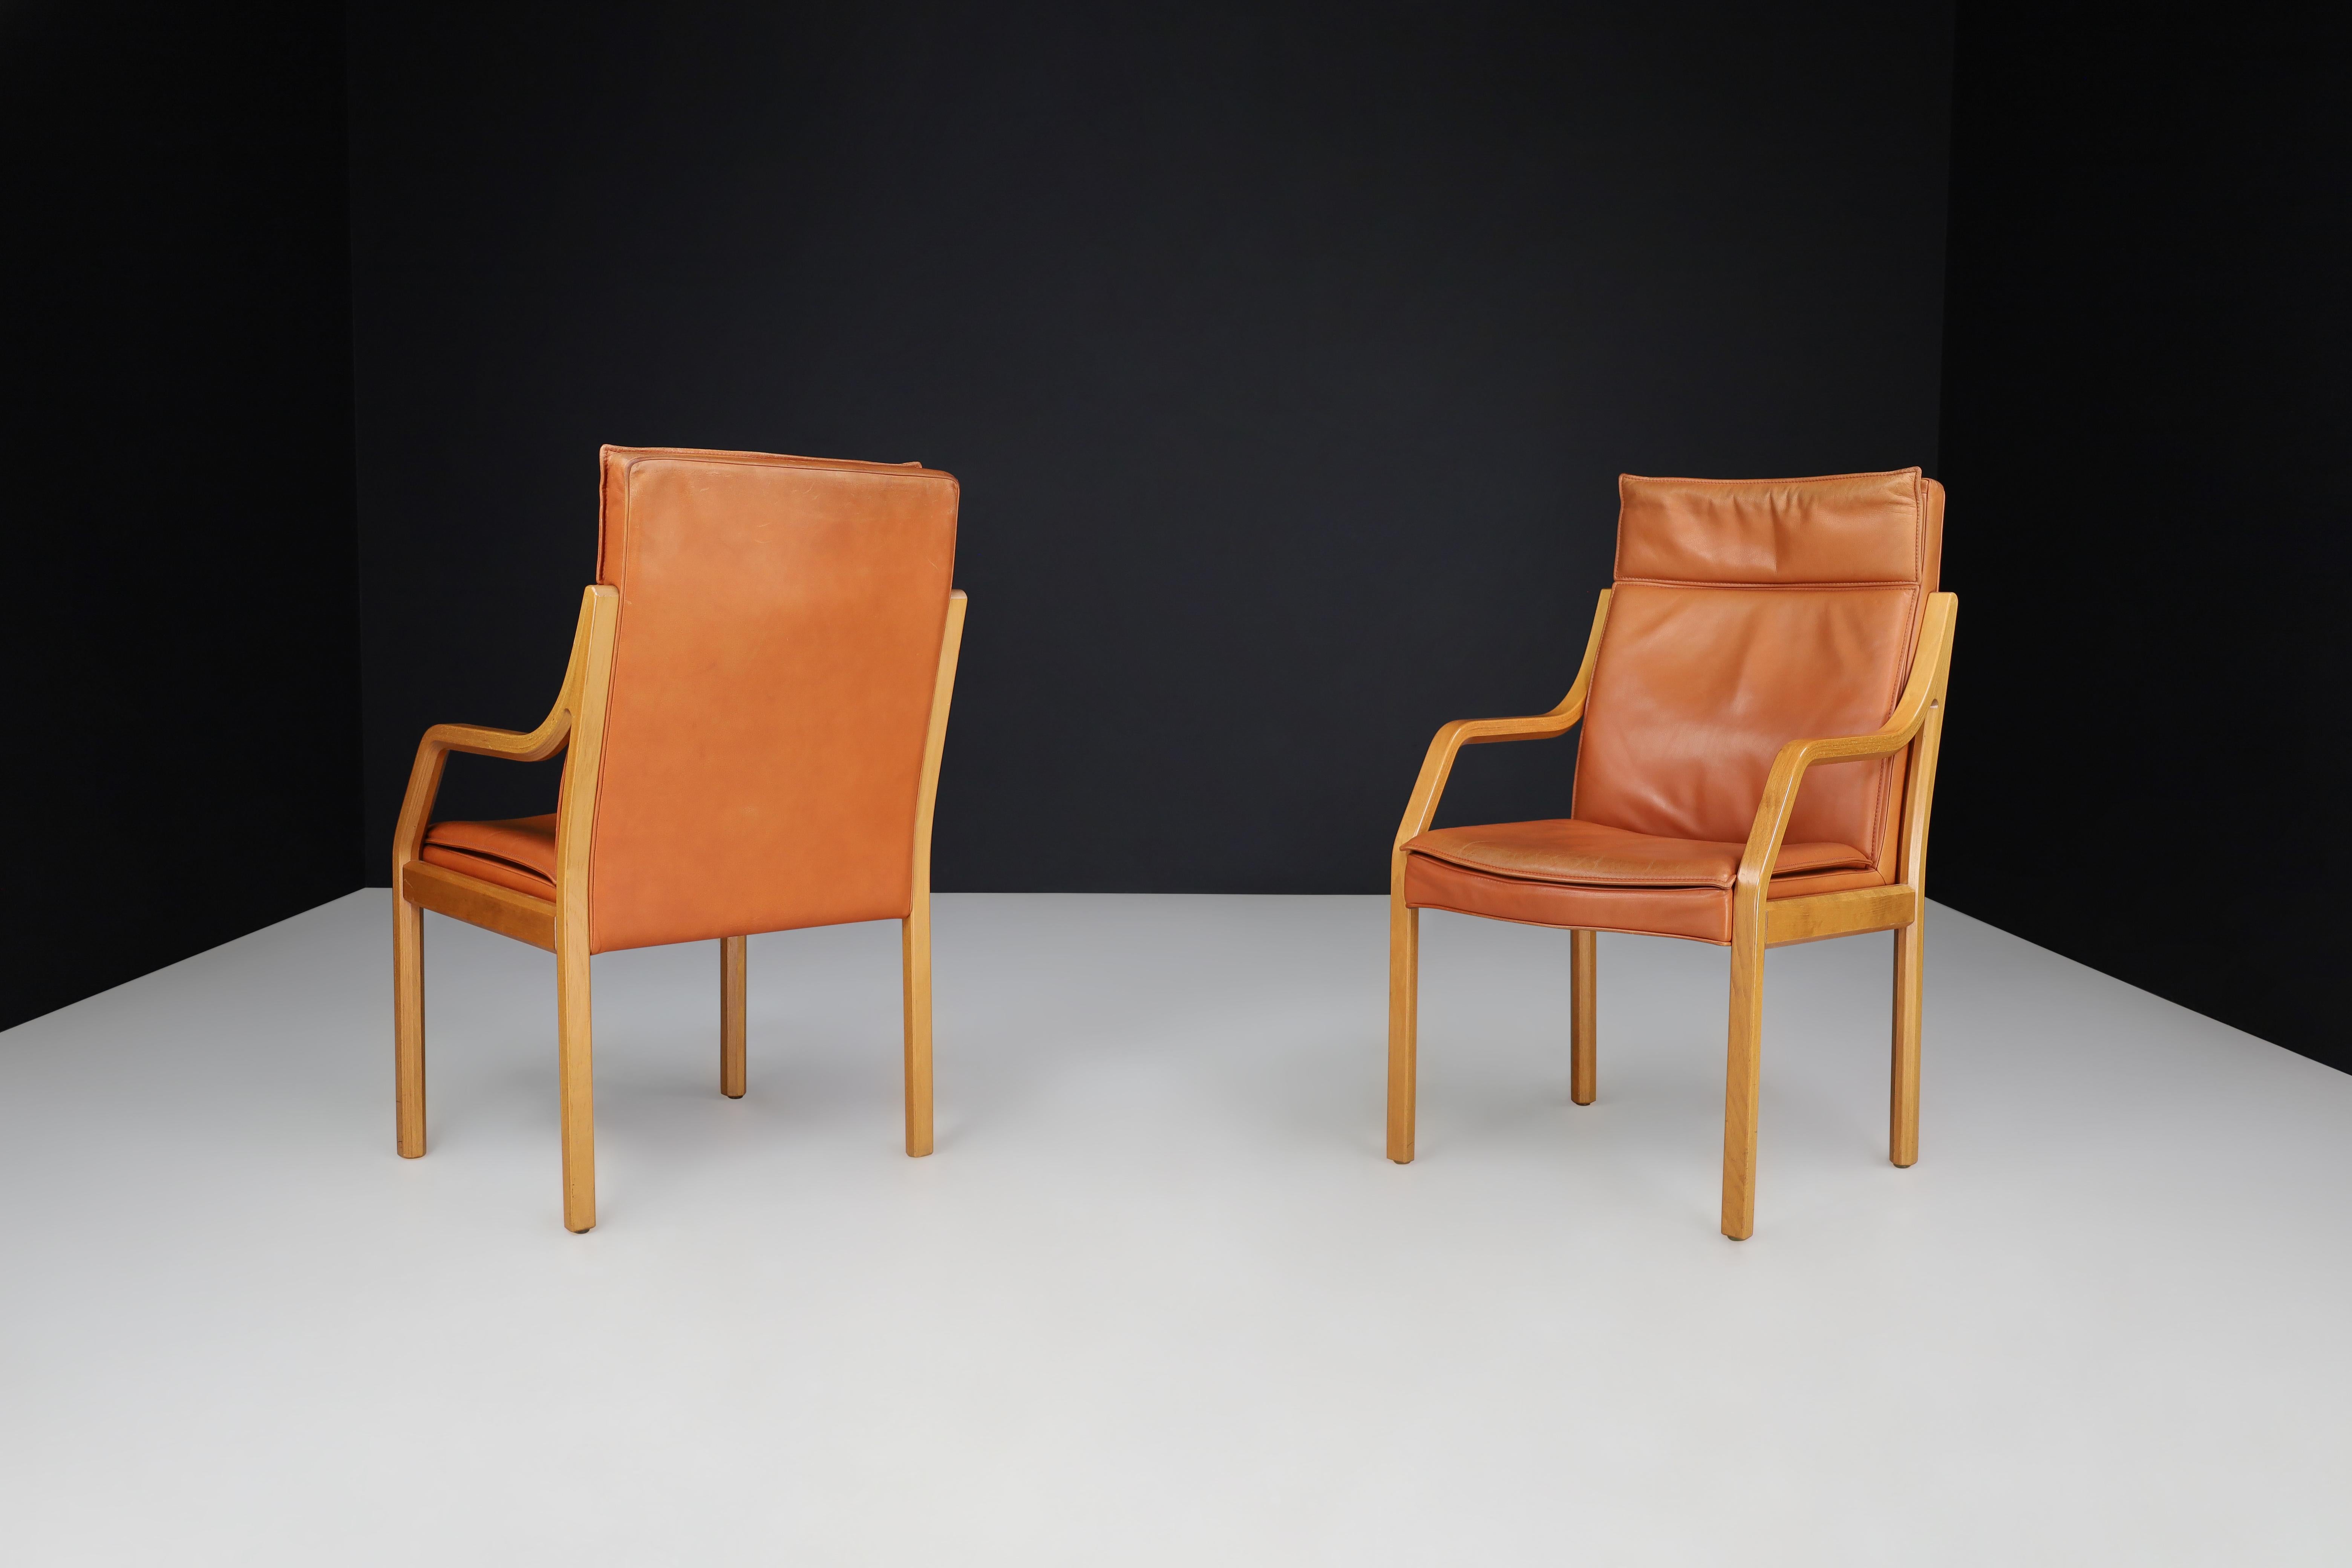 Walter Knoll Set of 16 Dining Room Chairs in Bentwood and Leather, Germany 1970s For Sale 7